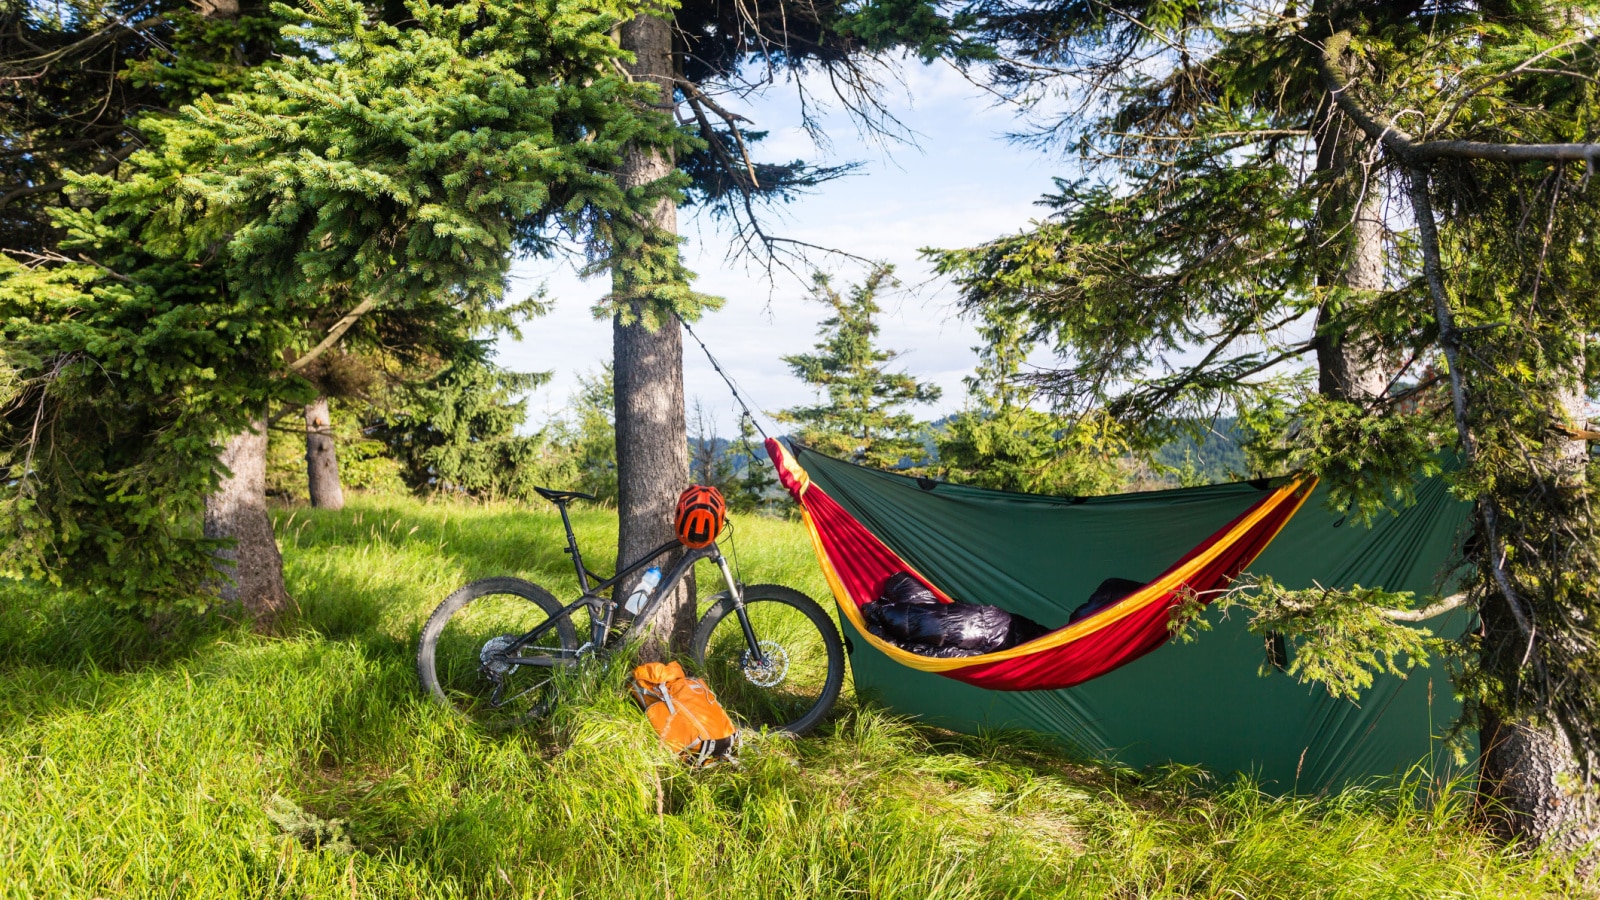 Camping in woods with hammock and sleeping bag on mountain biking adventure trip in green mountains. Travel campsite when mtb cycling with backpack. Lightweight shelter in wilderness forest, Poland.